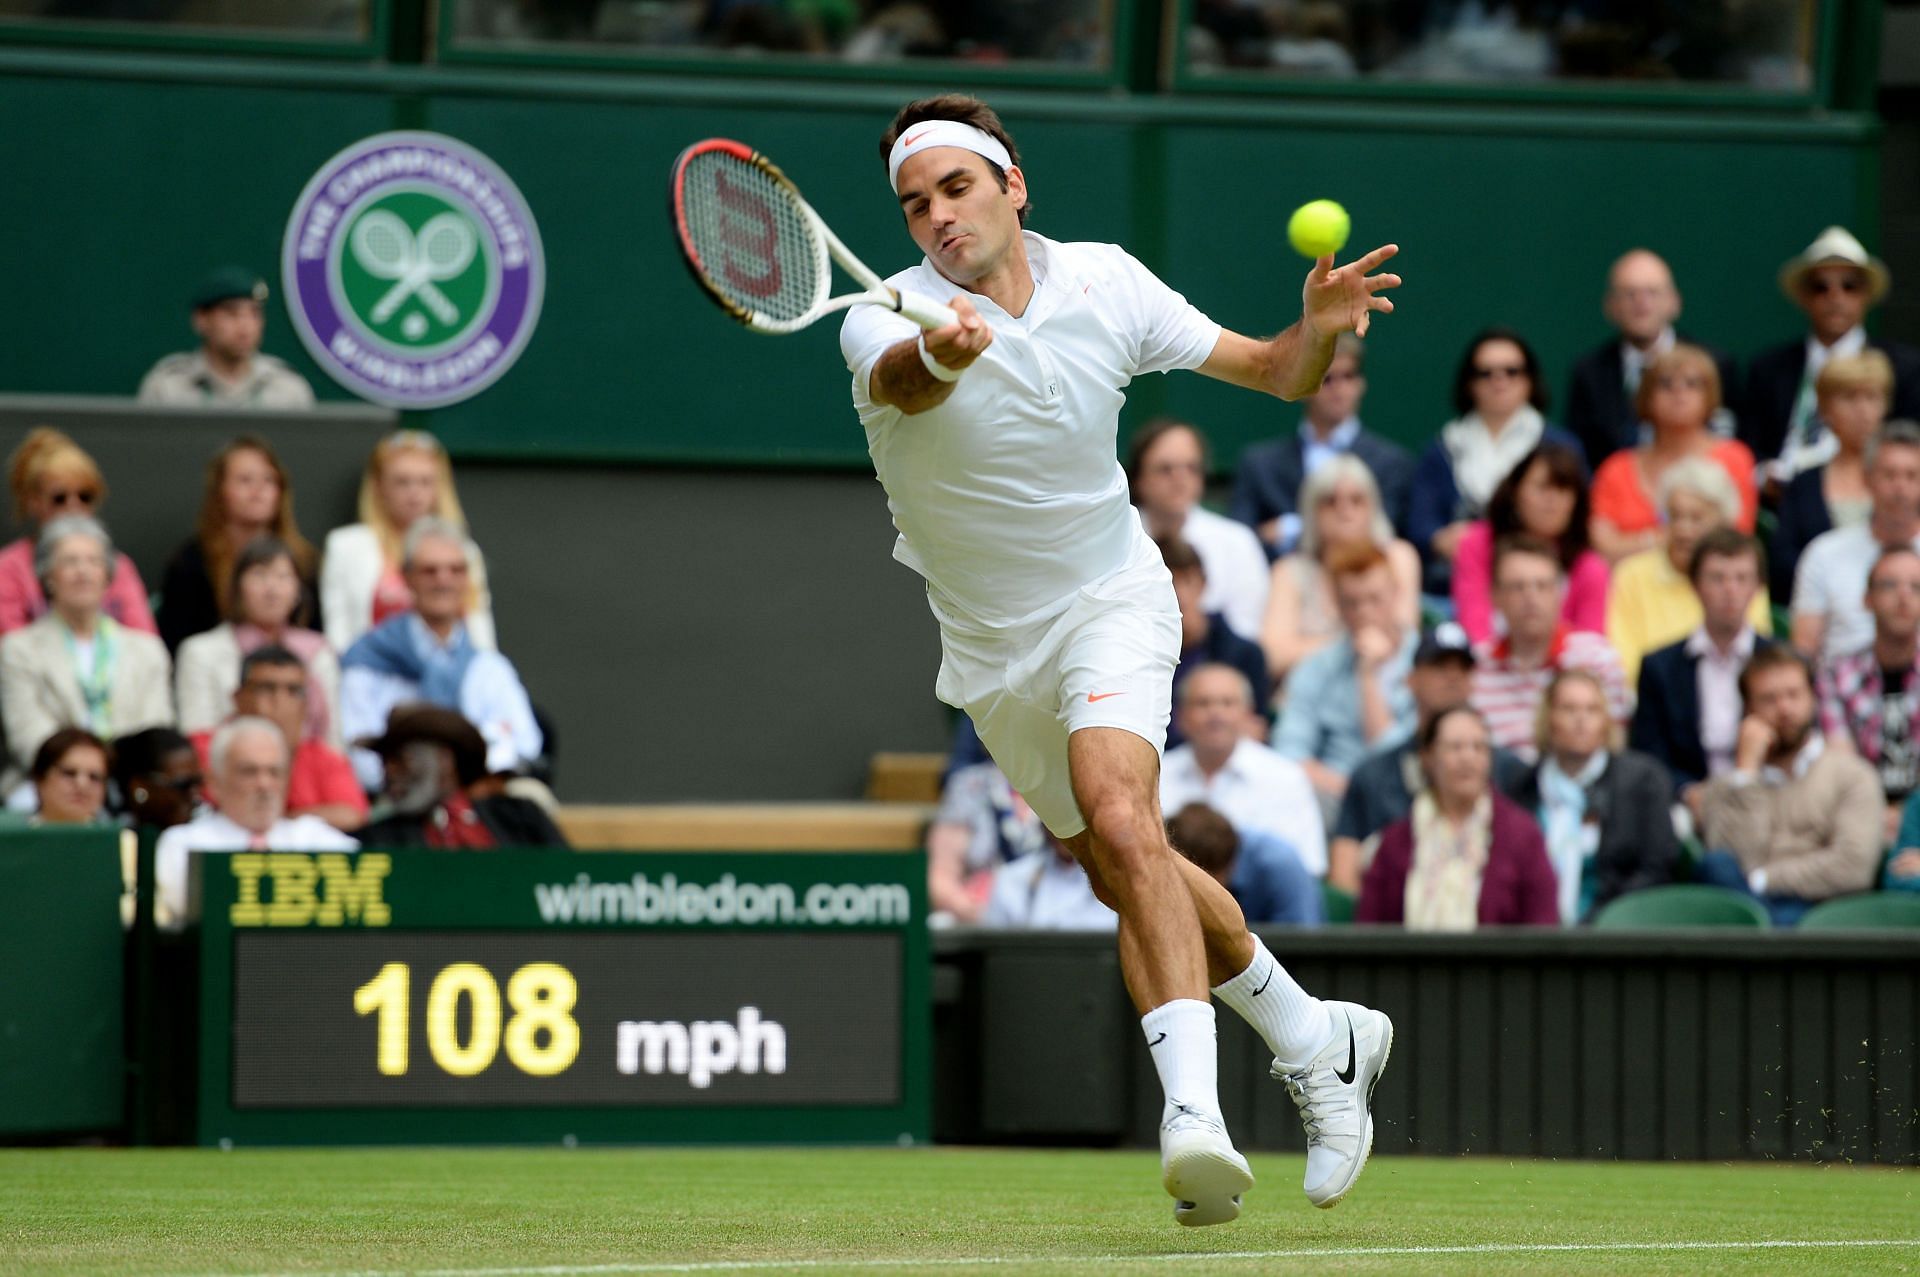 Roger Federer succumbed to a shock defeat in the second round against Sergiy Stakhovsky